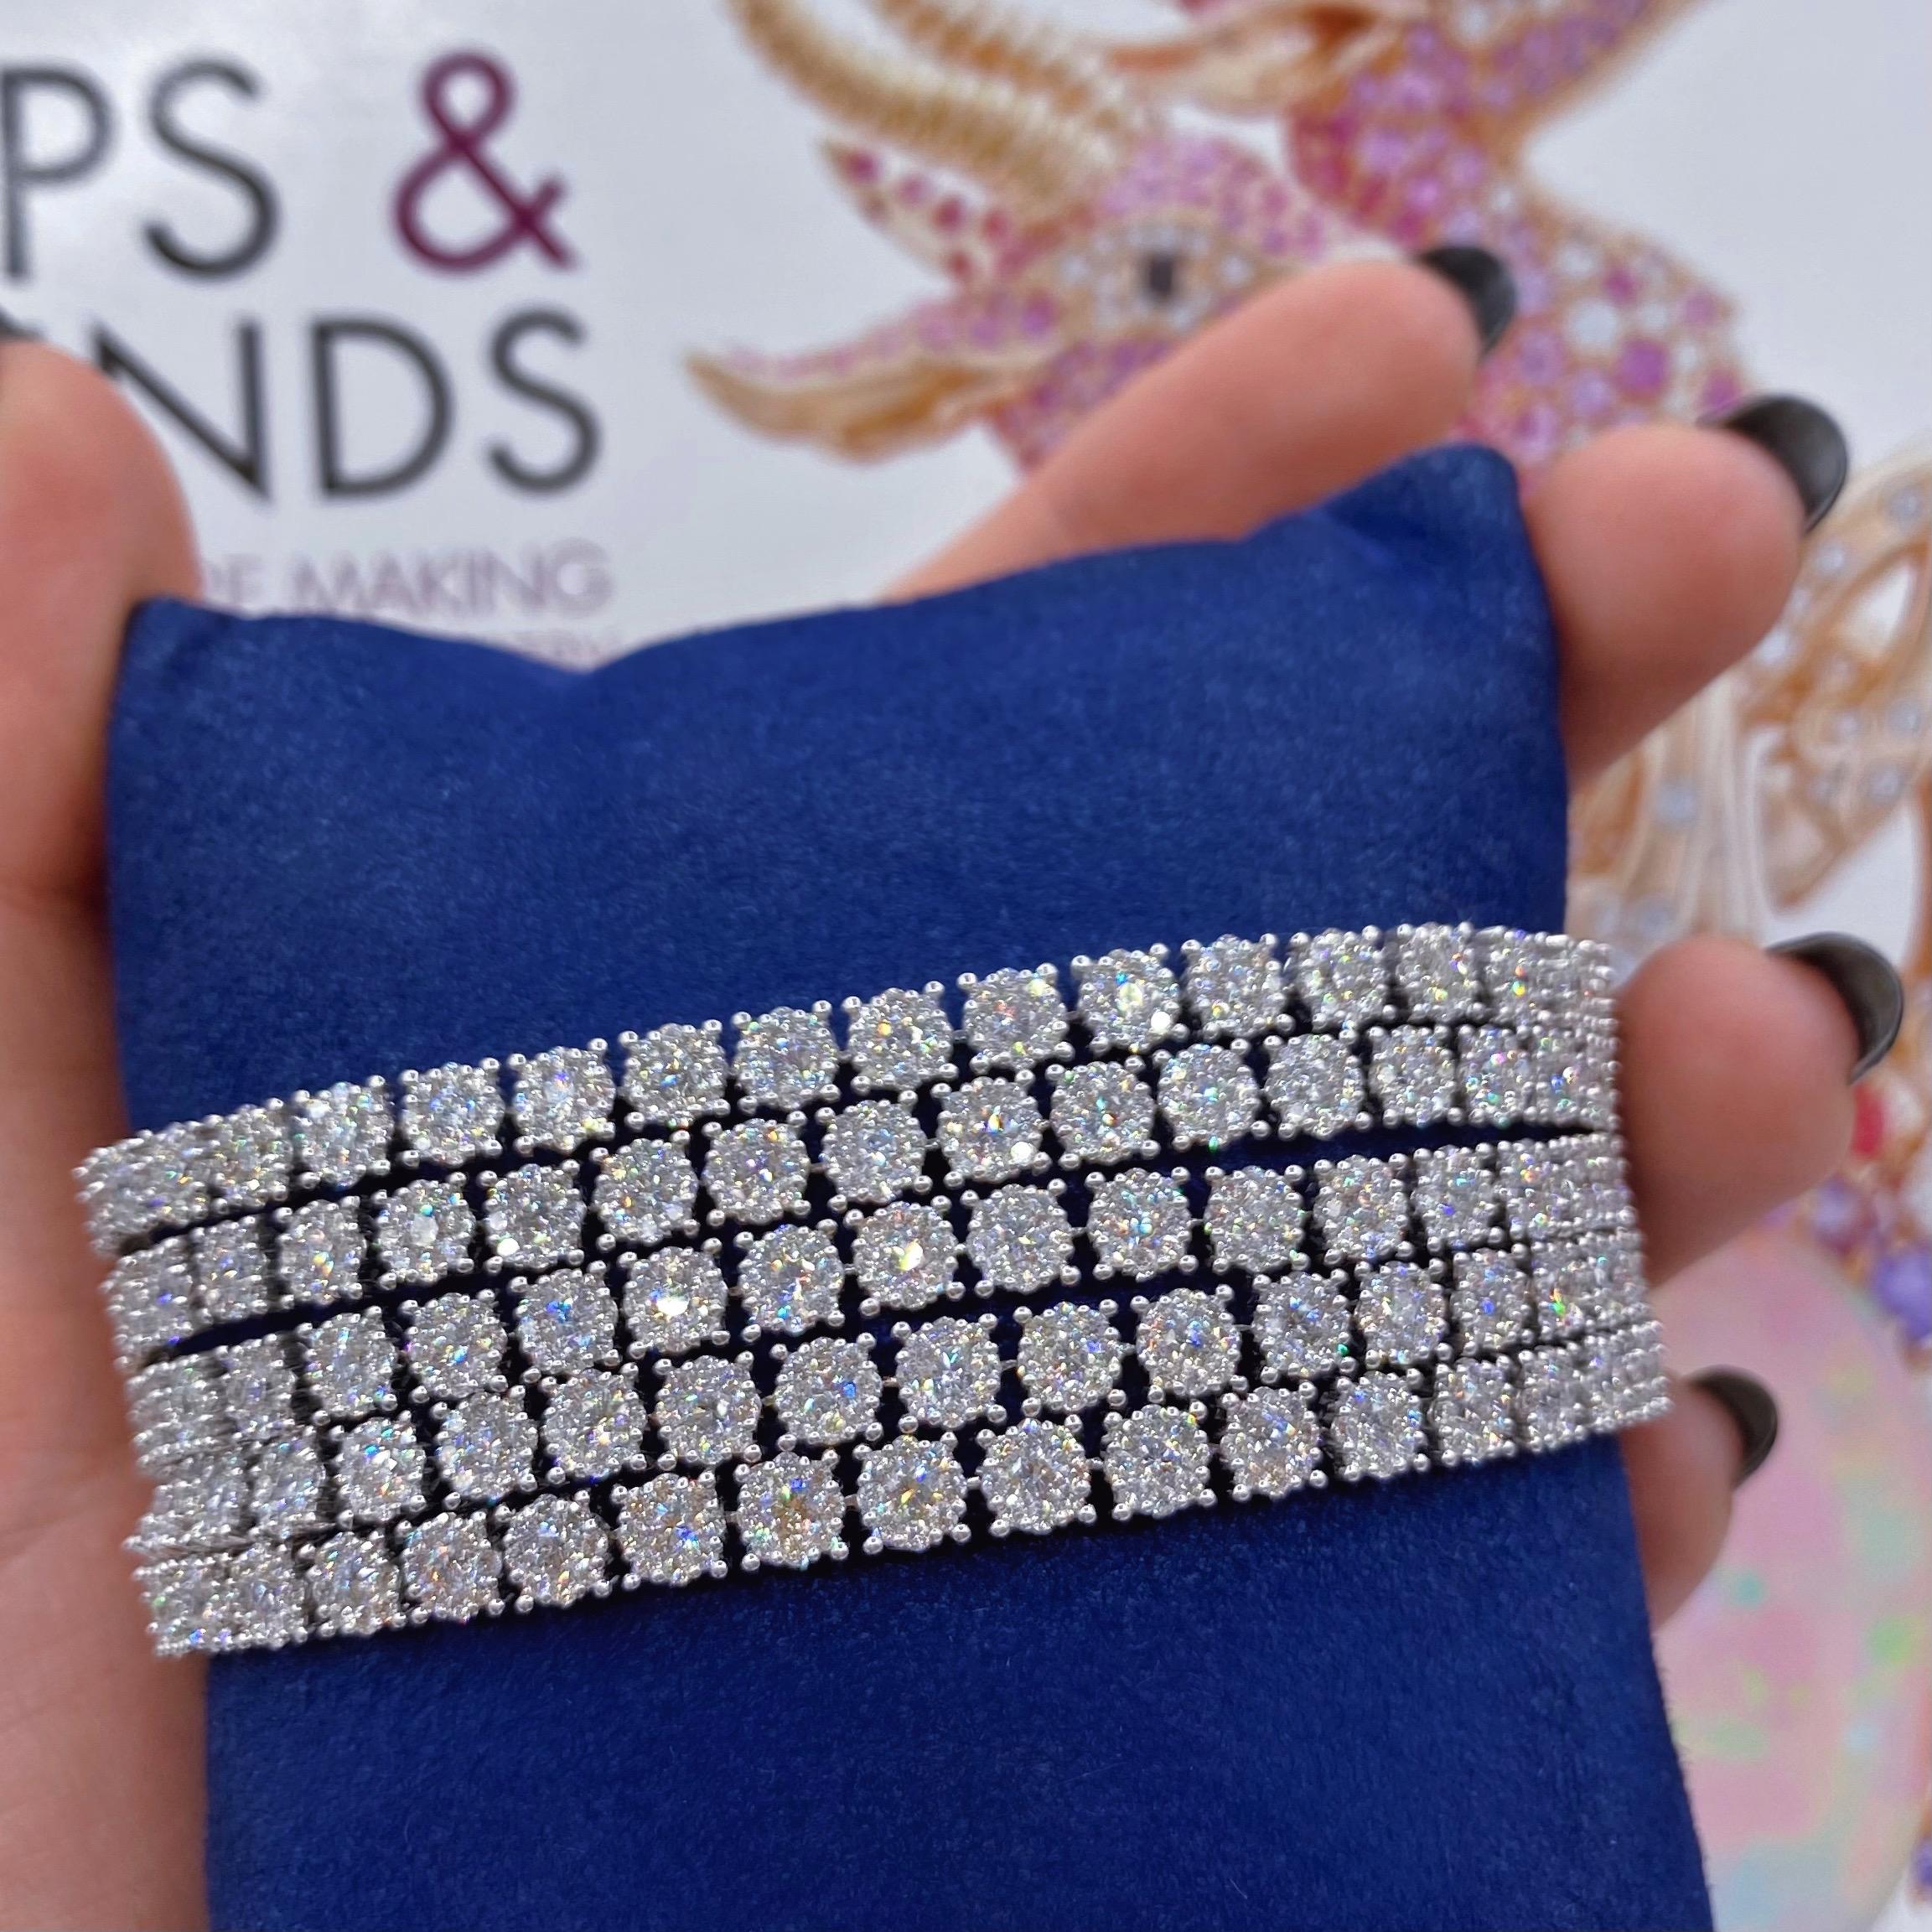 18k White Gold Bracelet features 19.95ct of Total Diamond Weight

Crafted in 18k White Gold
19.95ct total diamond weight
1710 stones
Diamonds cut: Round
Diamonds: Natural